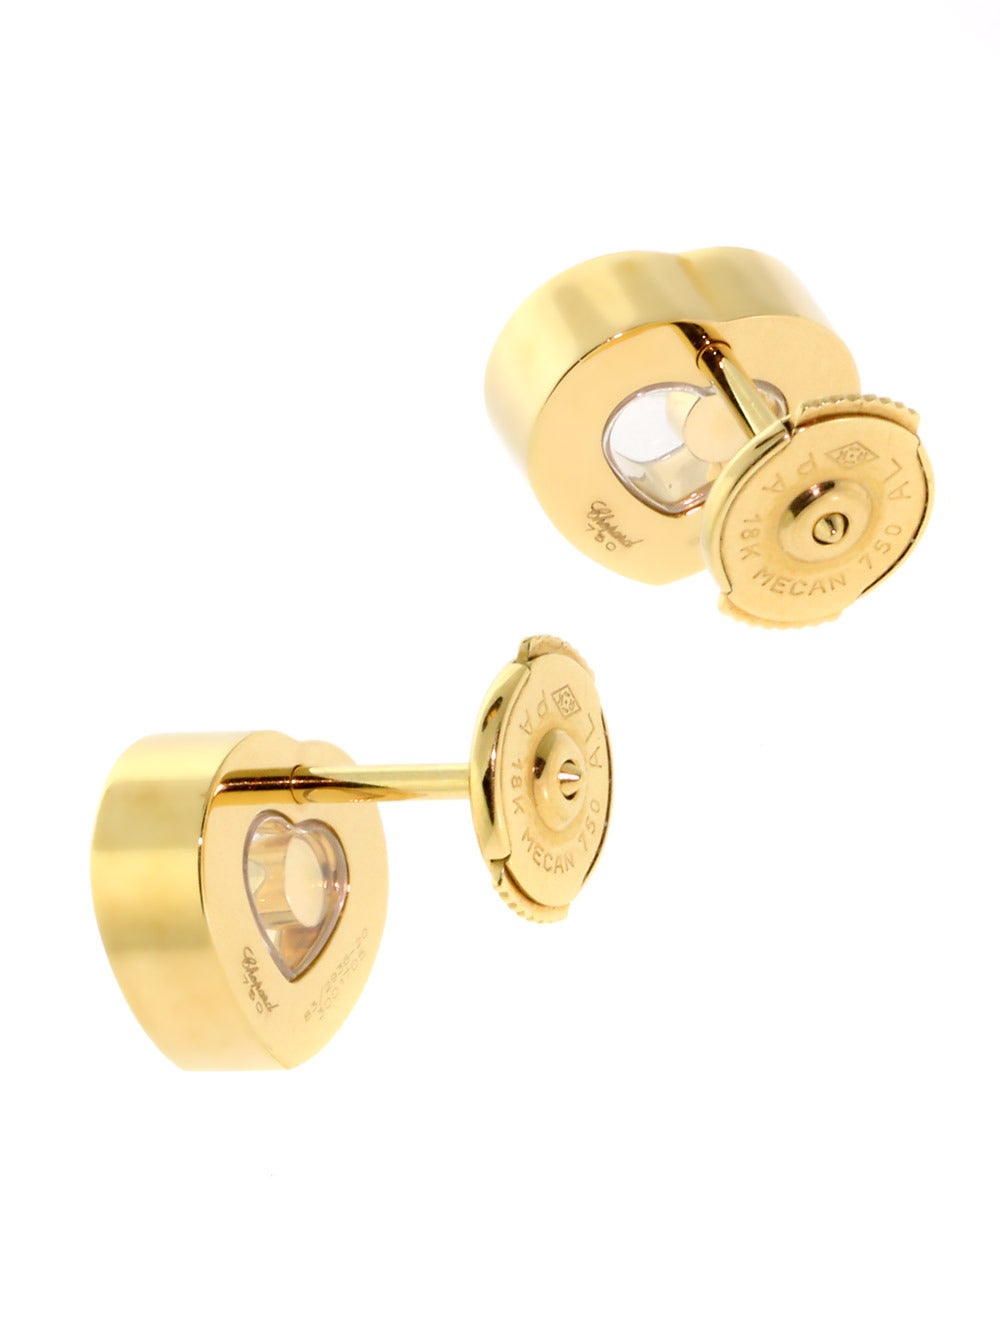 A fabulous pair of authentic Chopard Happy Diamond earrings set 26 of the finest round brilliant cut diamonds (.52ct) in 18k yellow gold.

Dimensions: .39″ Inches in diameter
Condition: New

Inventory ID: 0000236